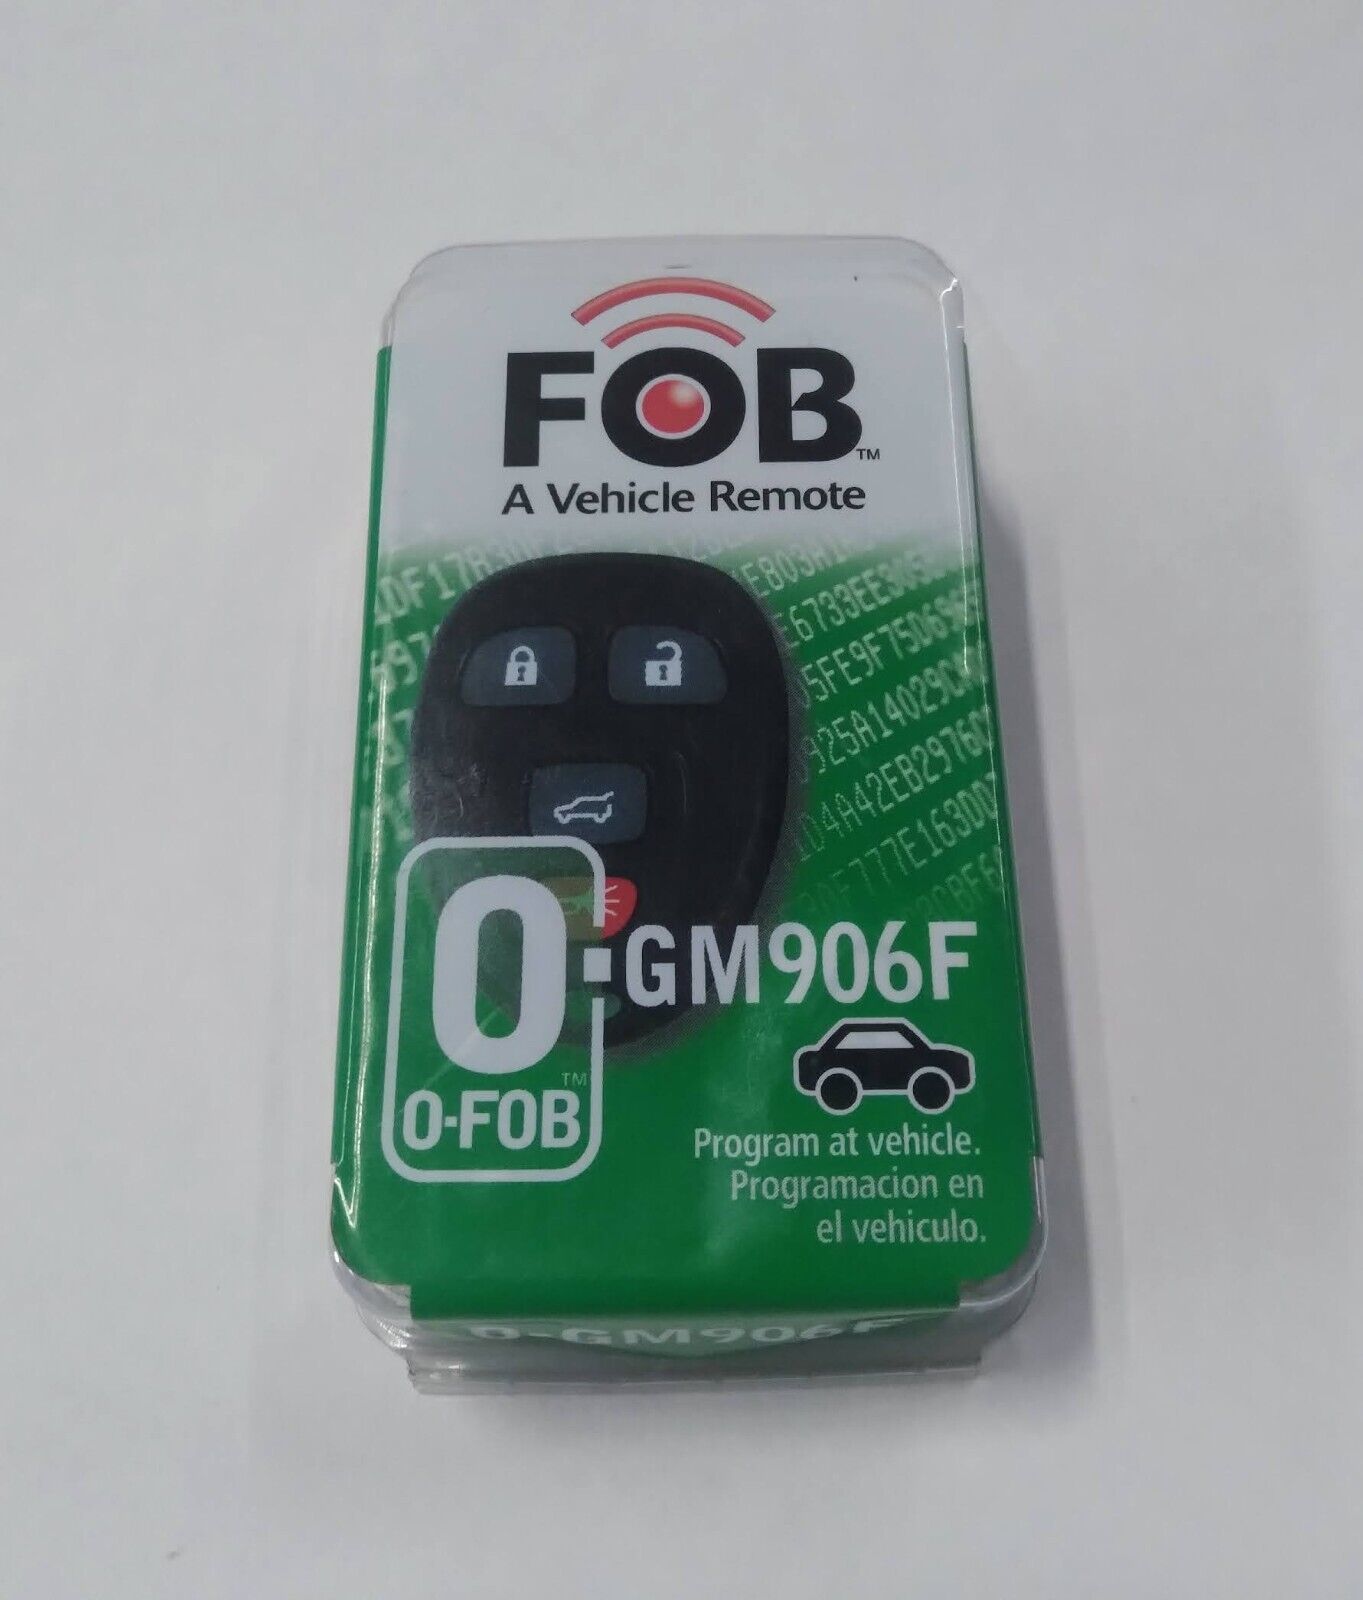 Primary image for HY-KO FOB Vehicle Remote 0-GM906F